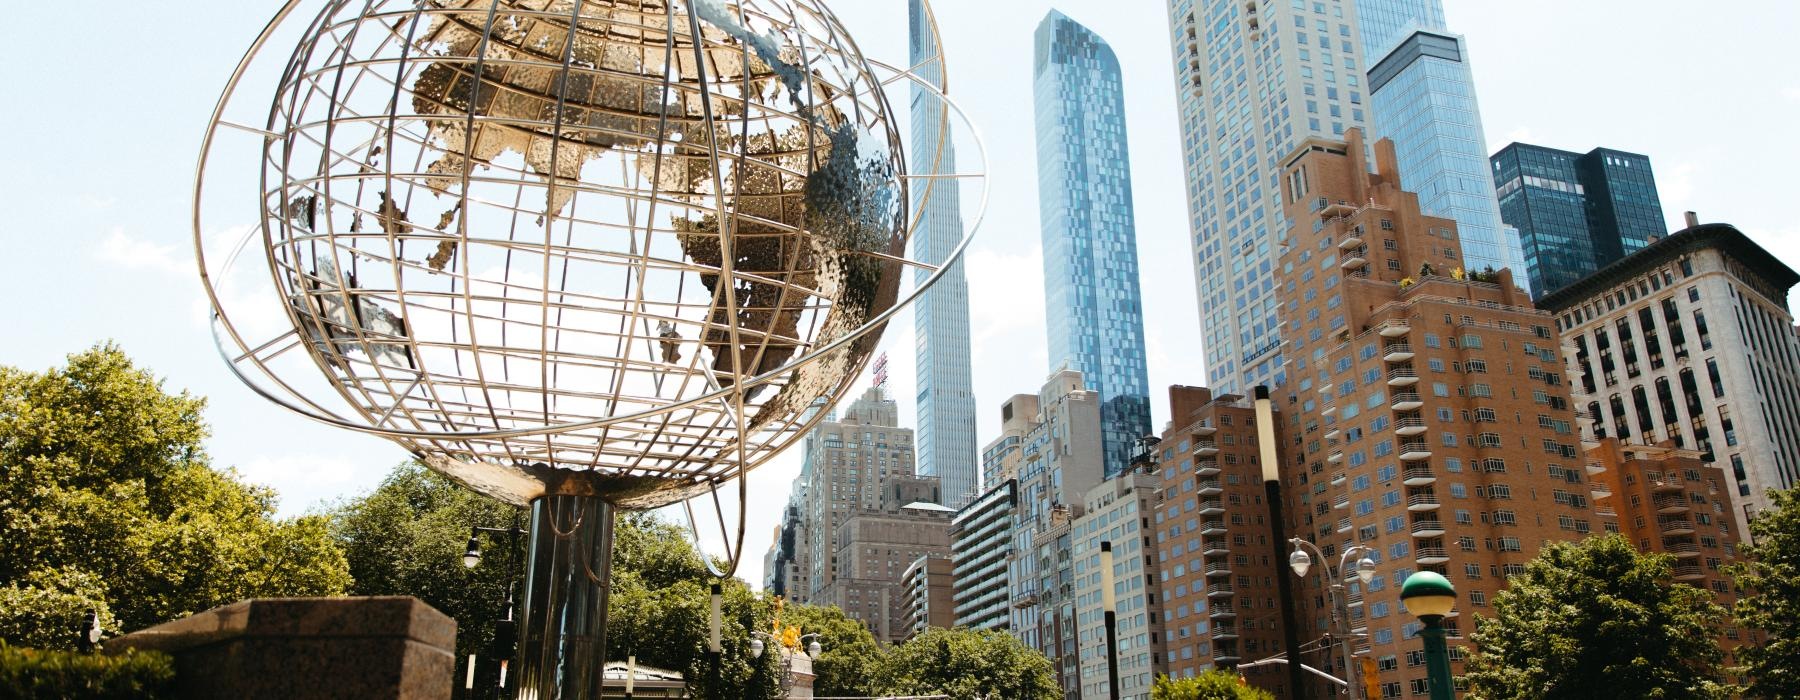 a large metal ball in a city